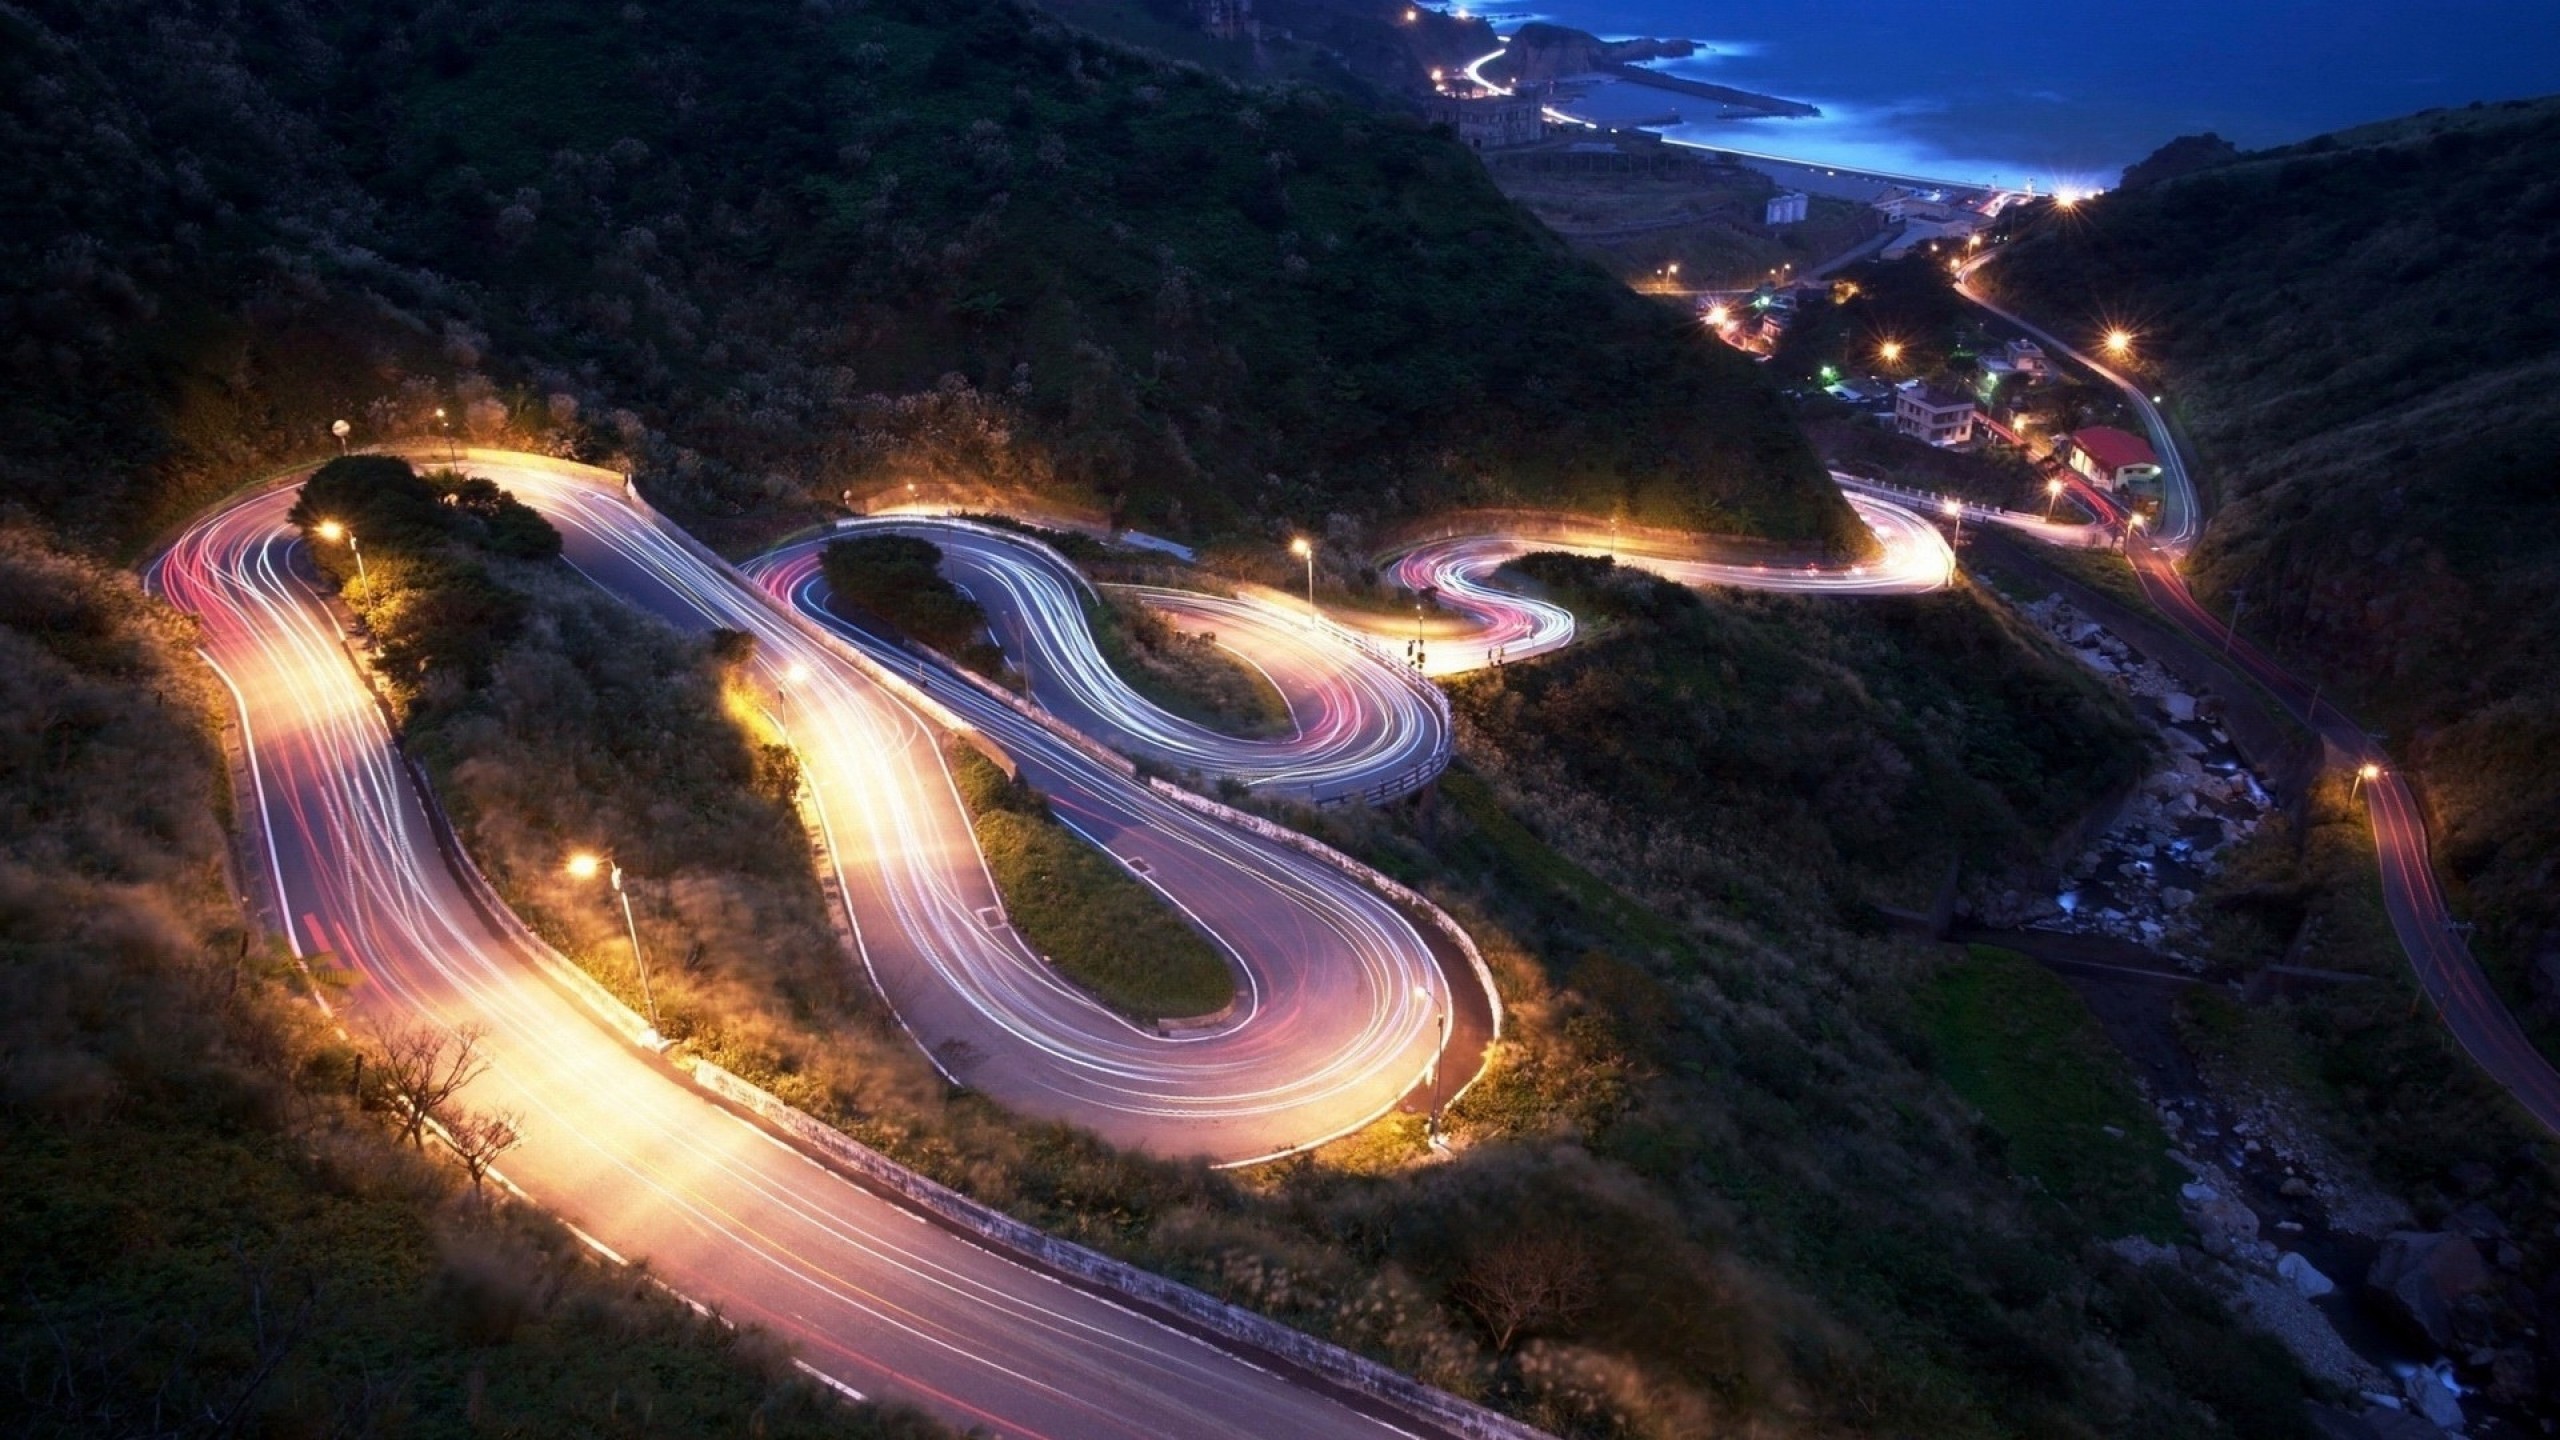 General 2560x1440 road hairpin turns landscape mountains lights long exposure Touge Taiwan